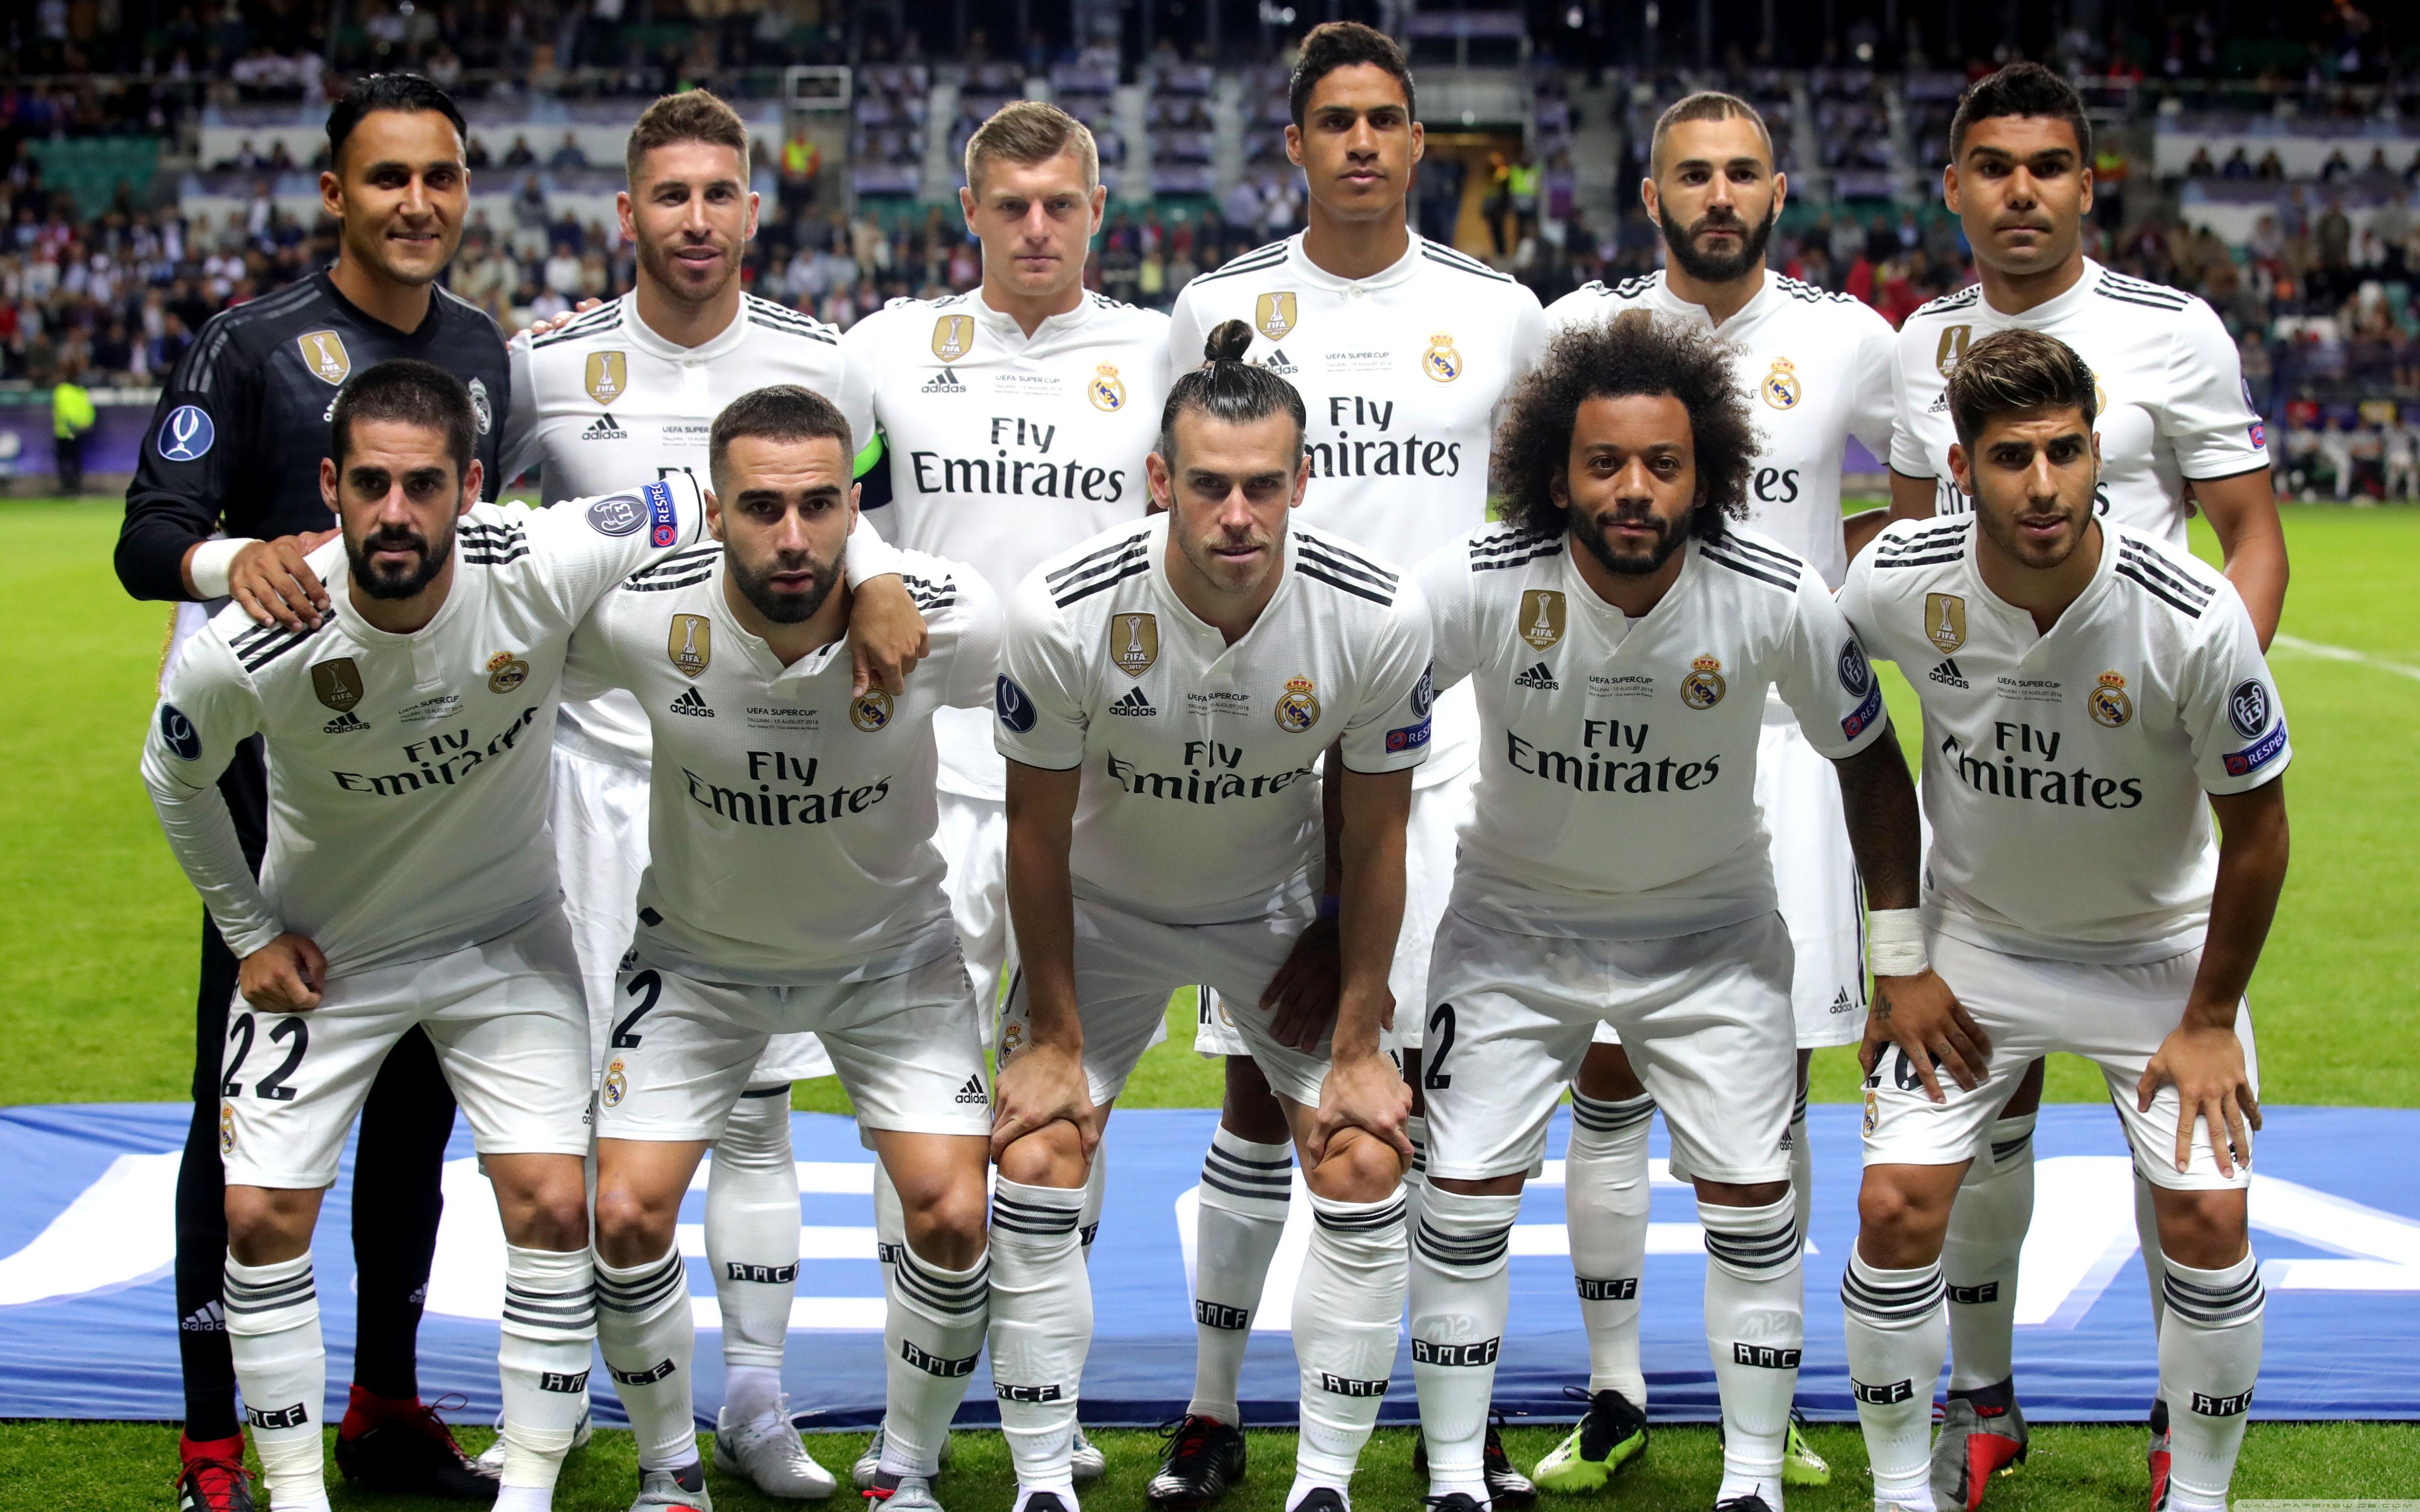 Real Madrid Team Wallpapers Top Free Real Madrid Team Backgrounds Wallpaperaccess